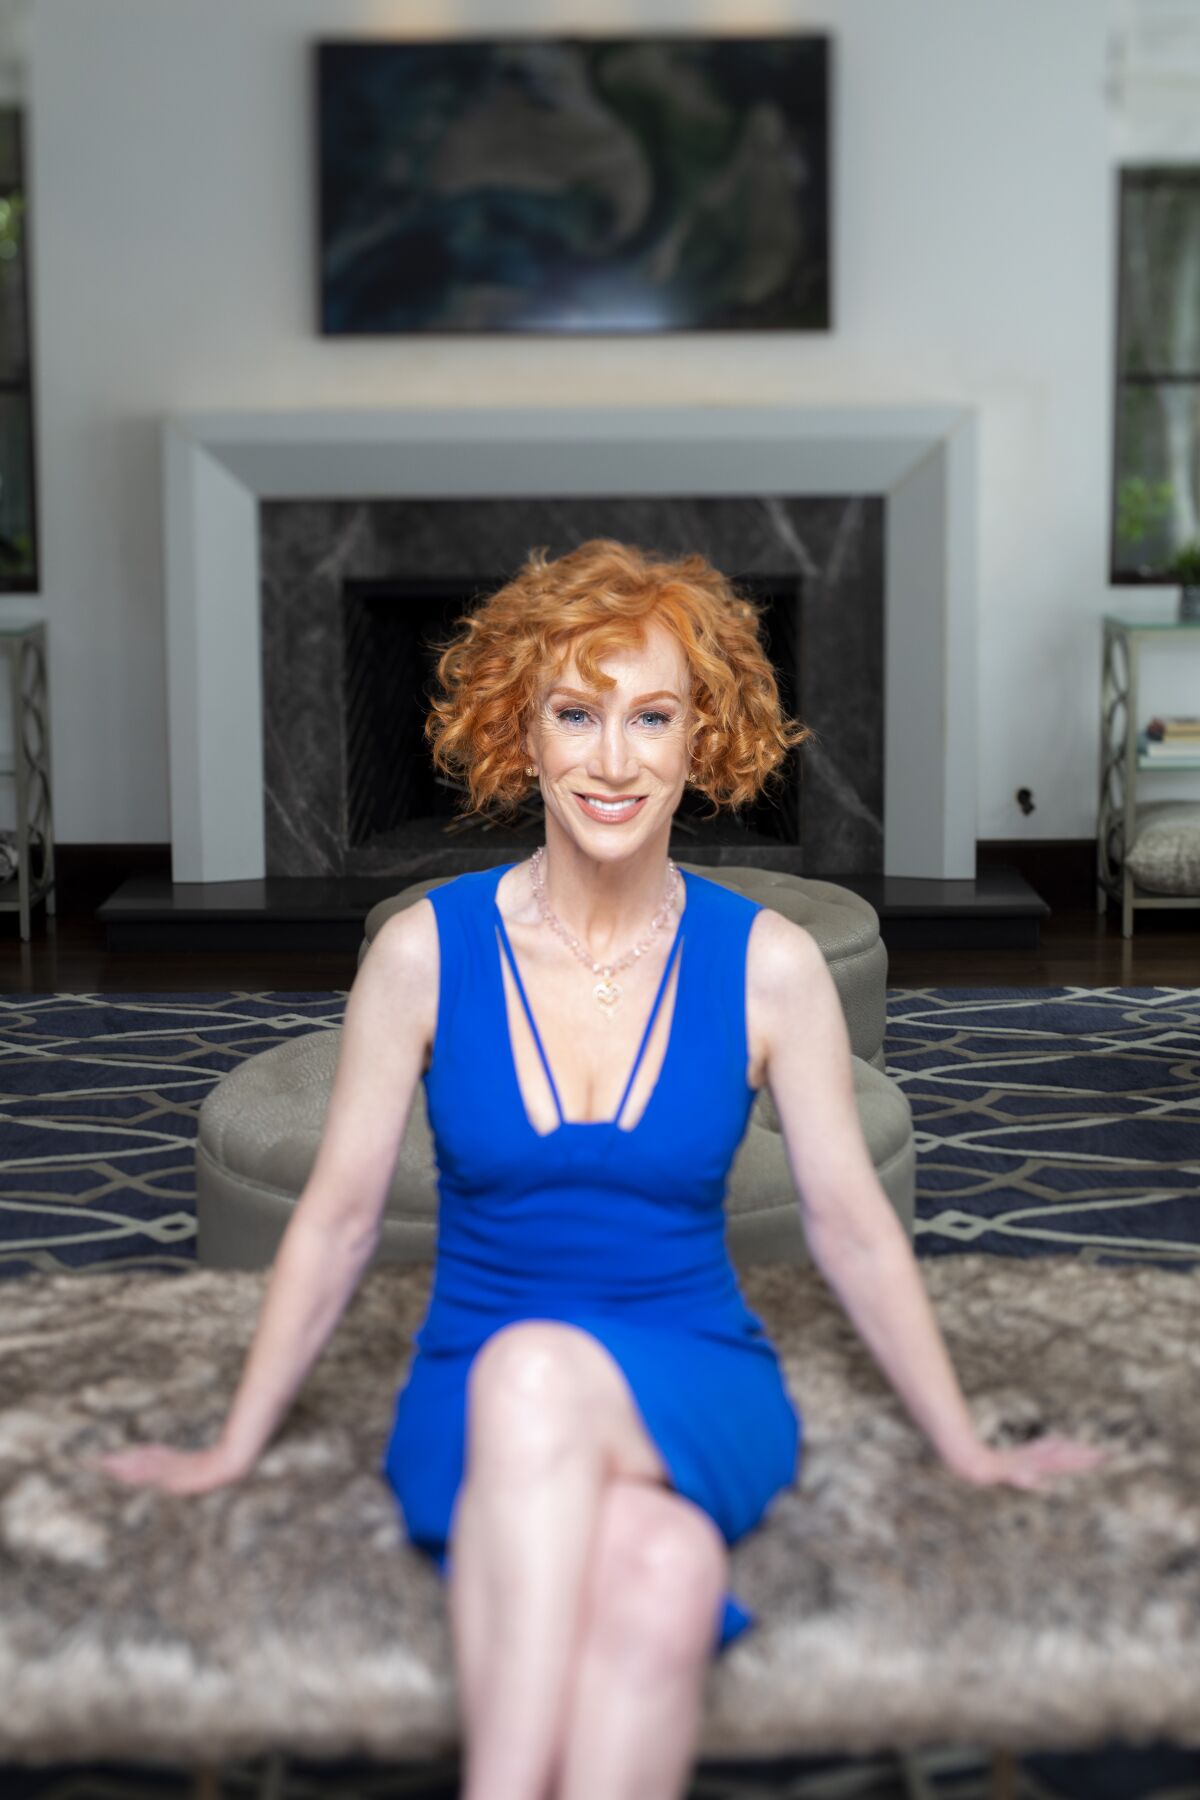 Kathy Griffin seated in her home wearing a blue dress